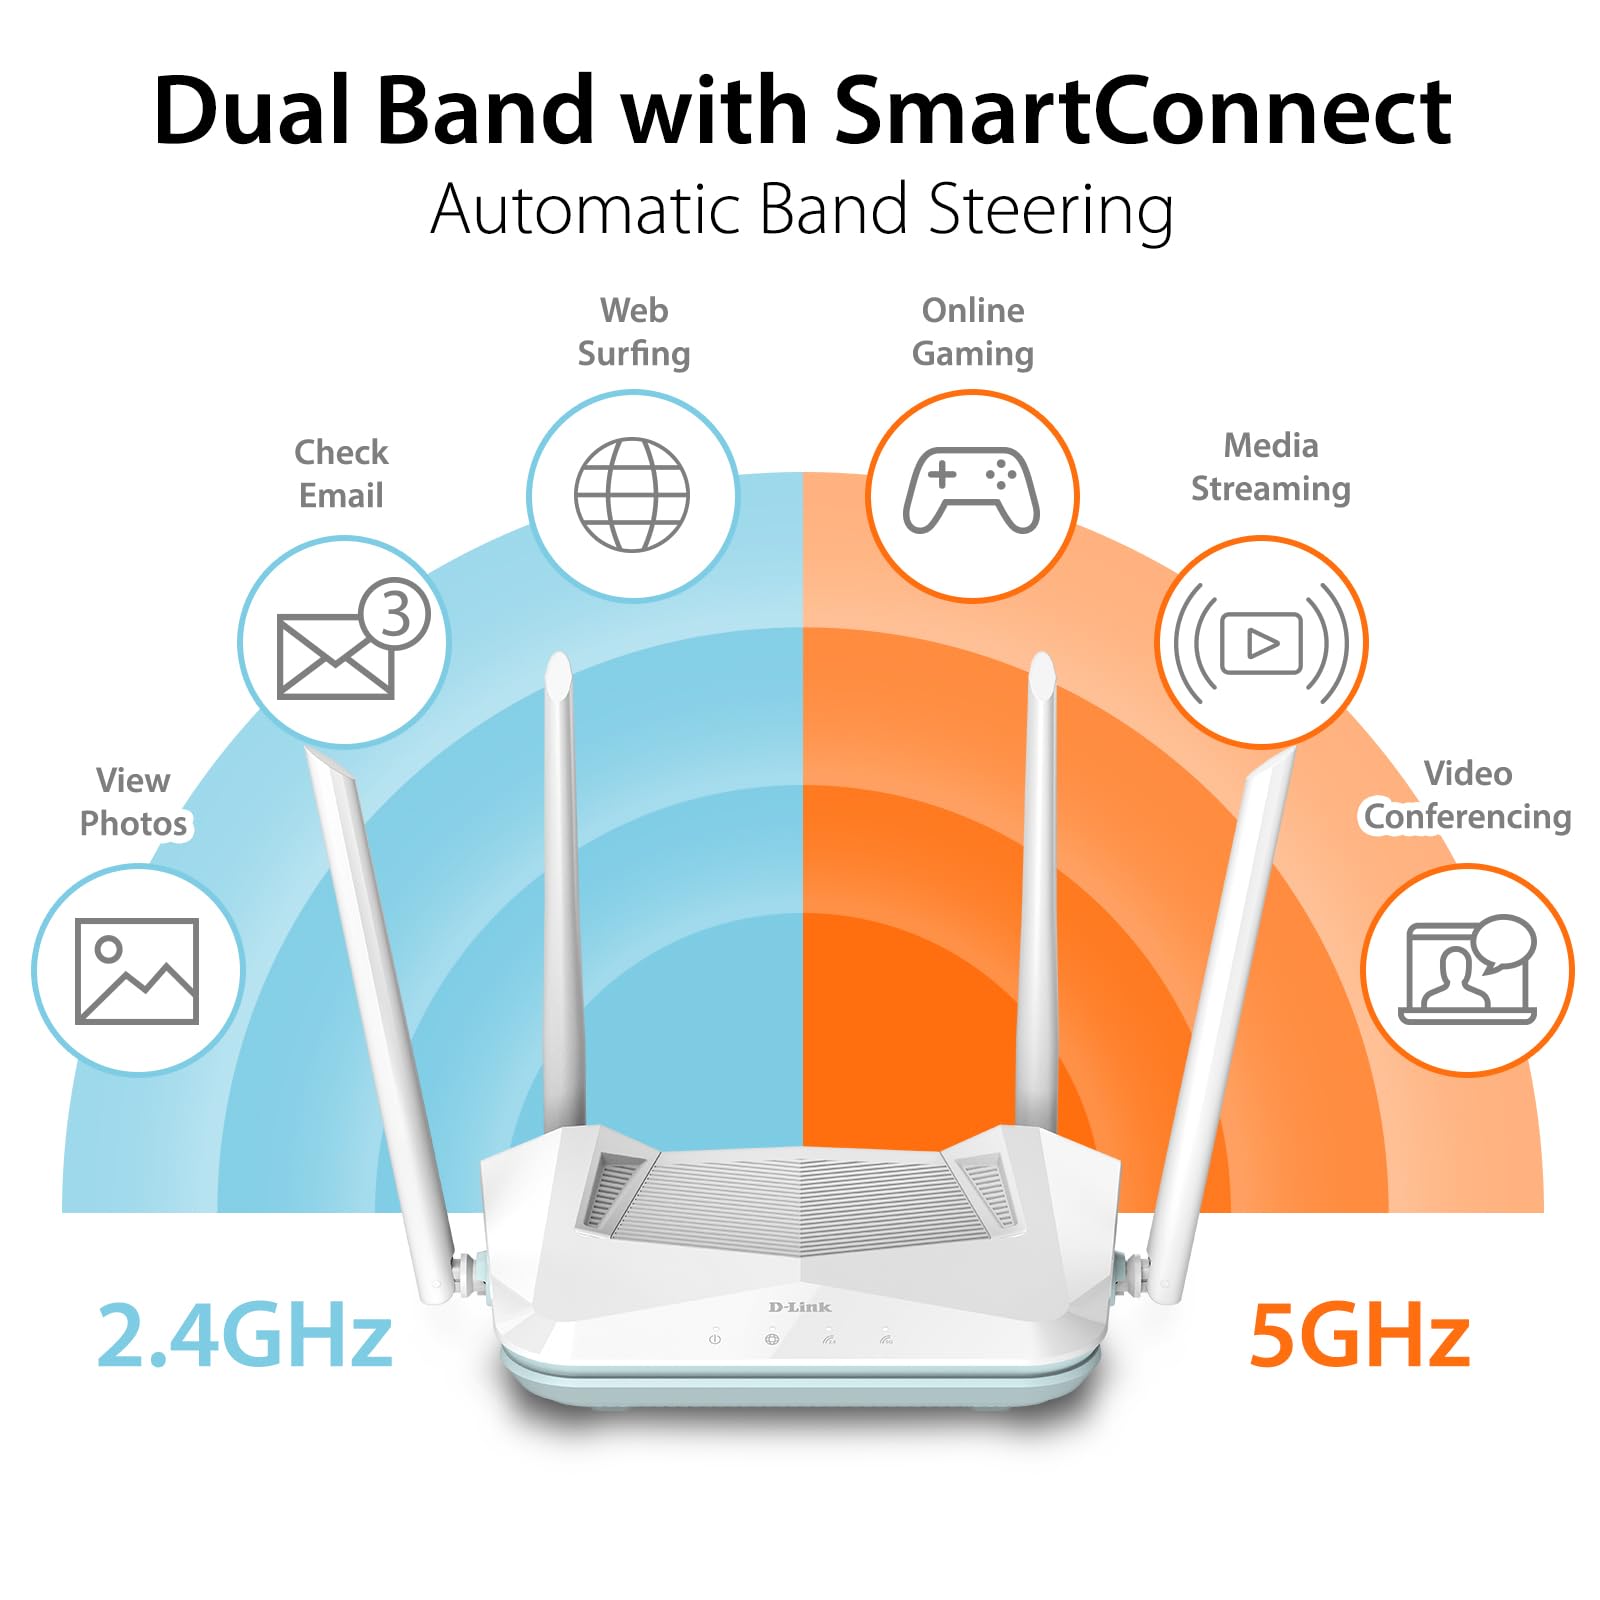 D-Link WiFi 6 Router, AX1500 Ai Series 802.11AX Smart Home Wireless Internet Gigabit Dual Band Network System (R15)